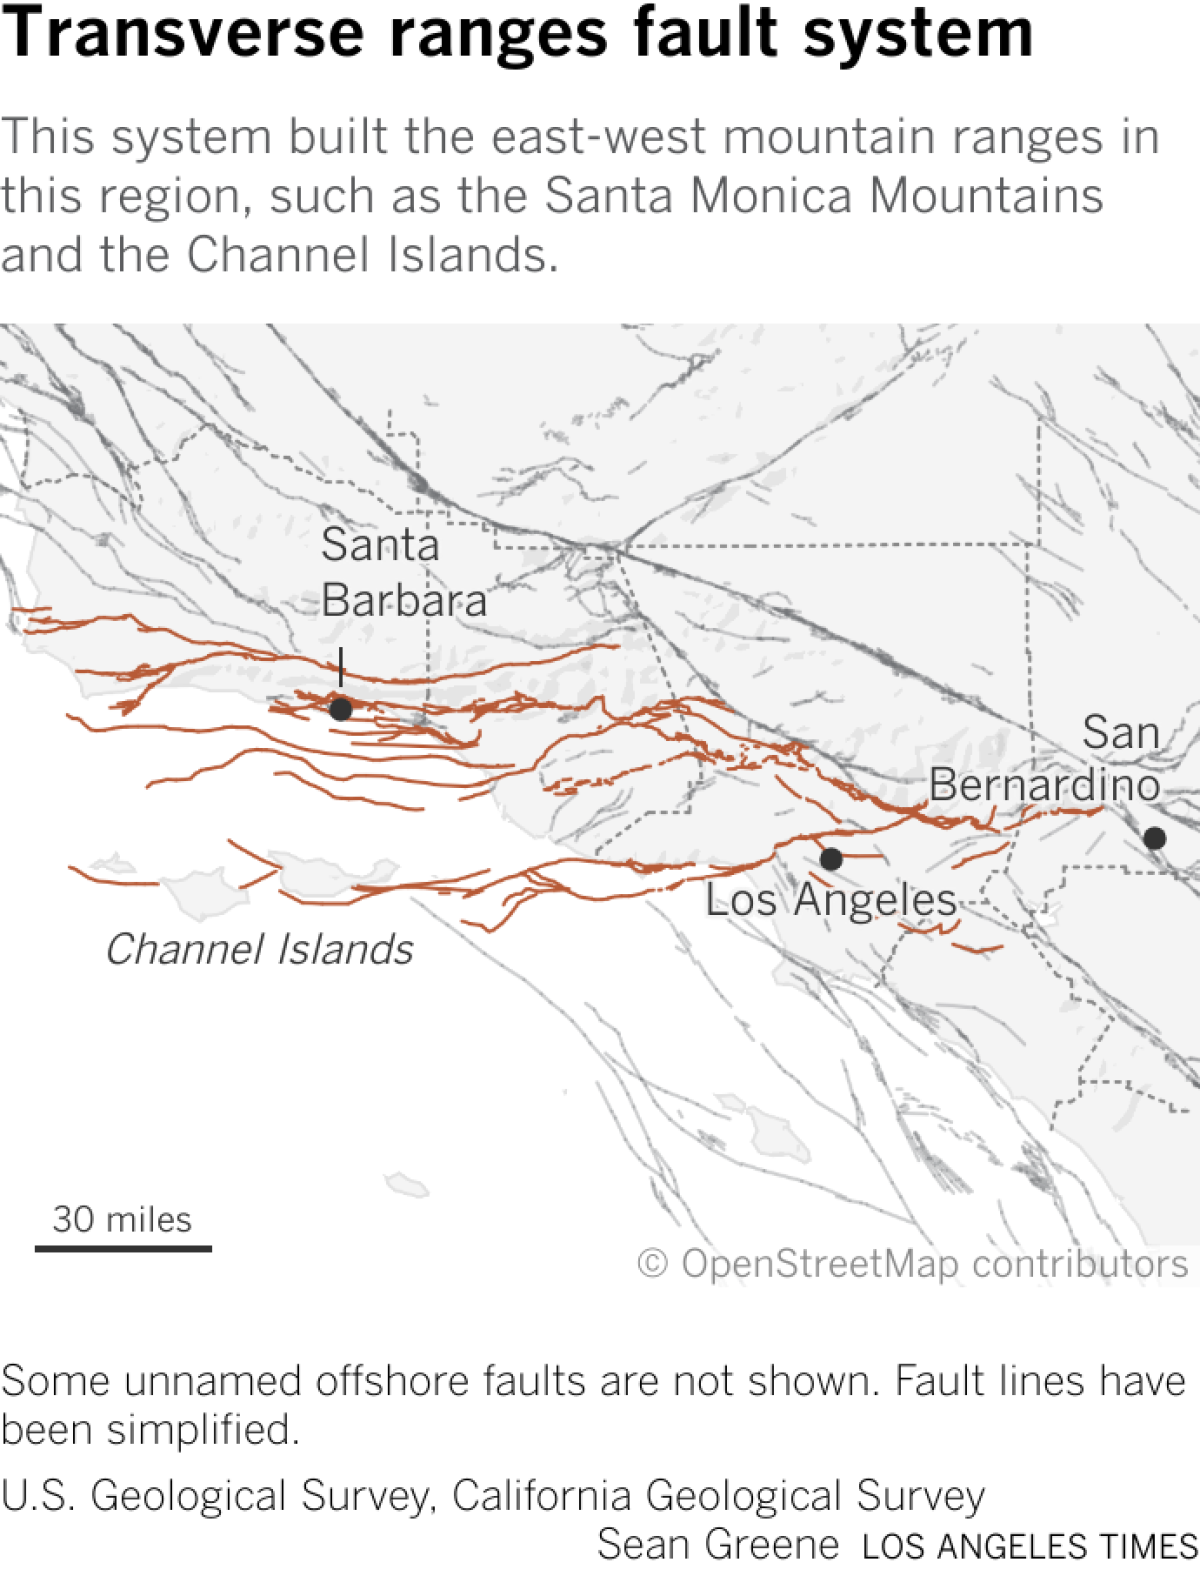 Map shows the locations of faults in the Transverse Ranges. The faults move from west to east through the mountains of Santa Barbara, Ventura and Los Angeles Counties, as well as the Channel Islands.